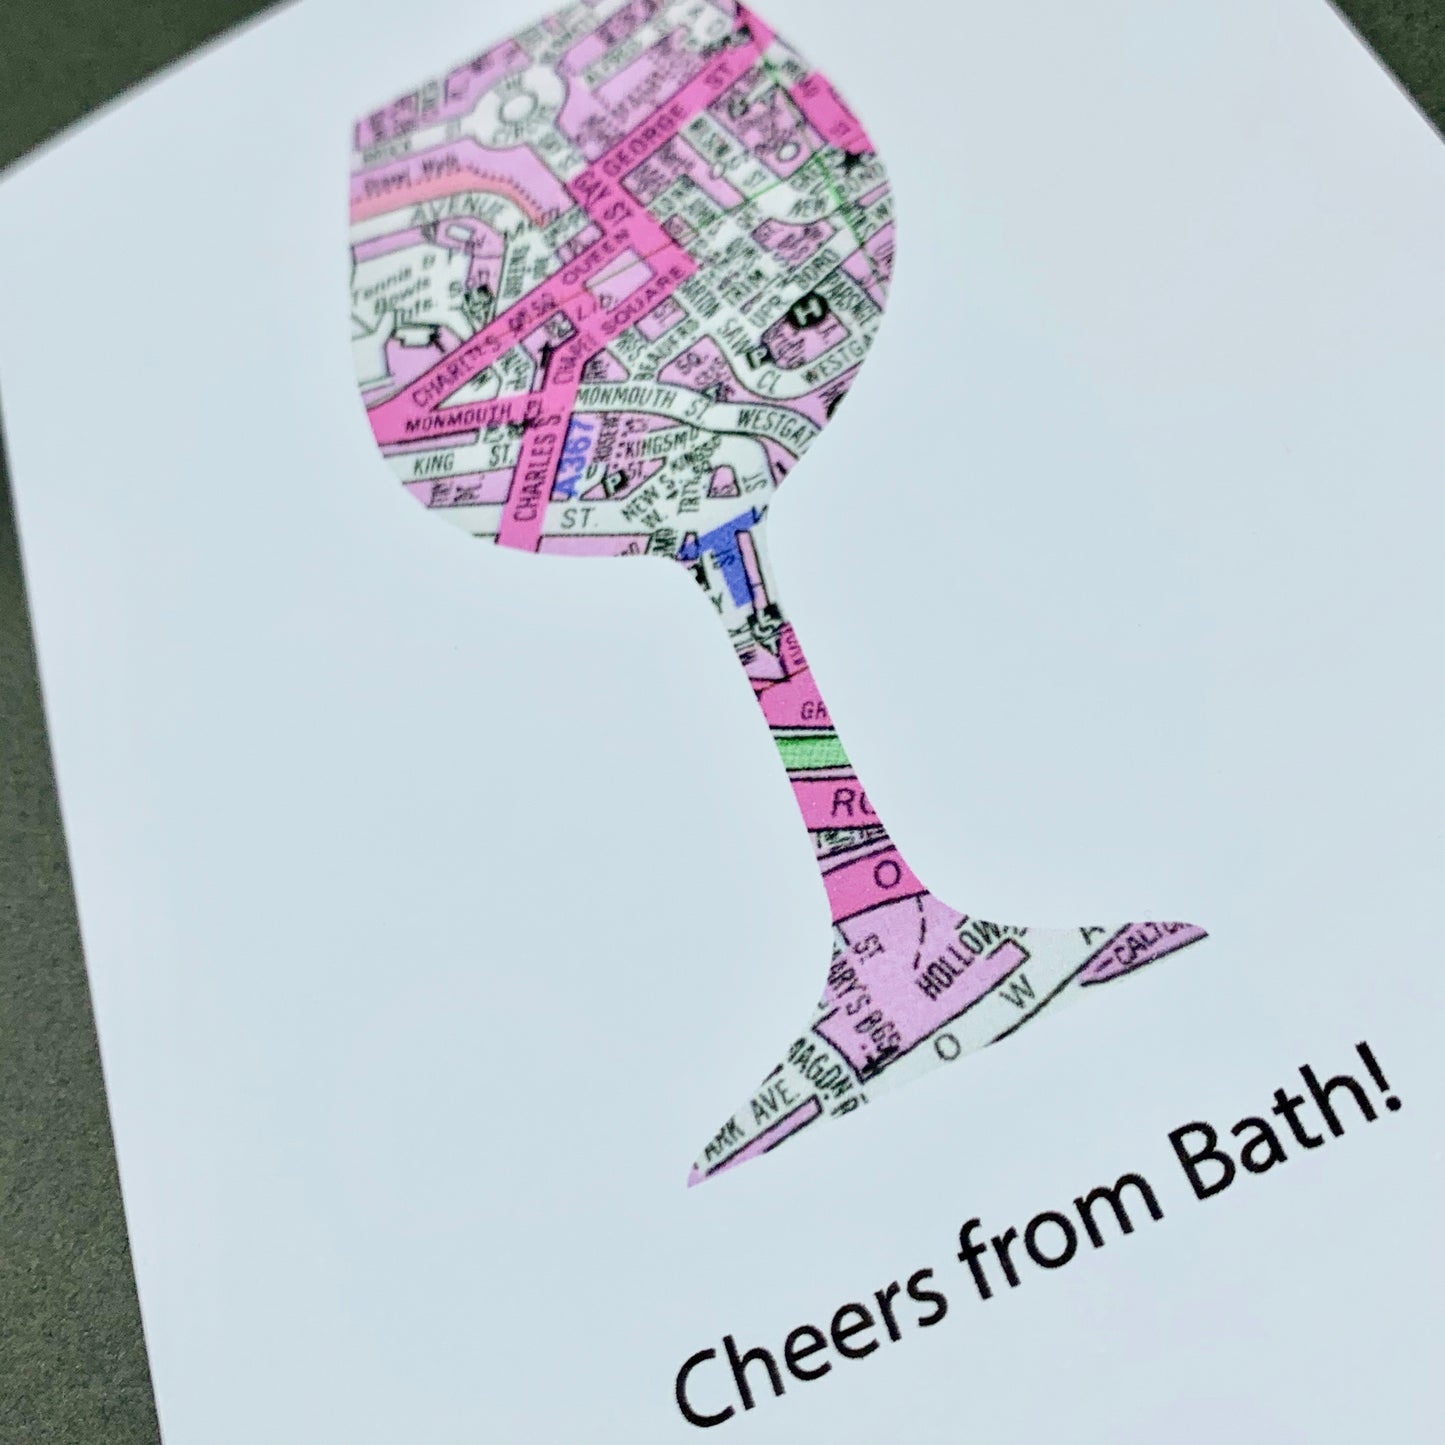 Cheers from Bath!